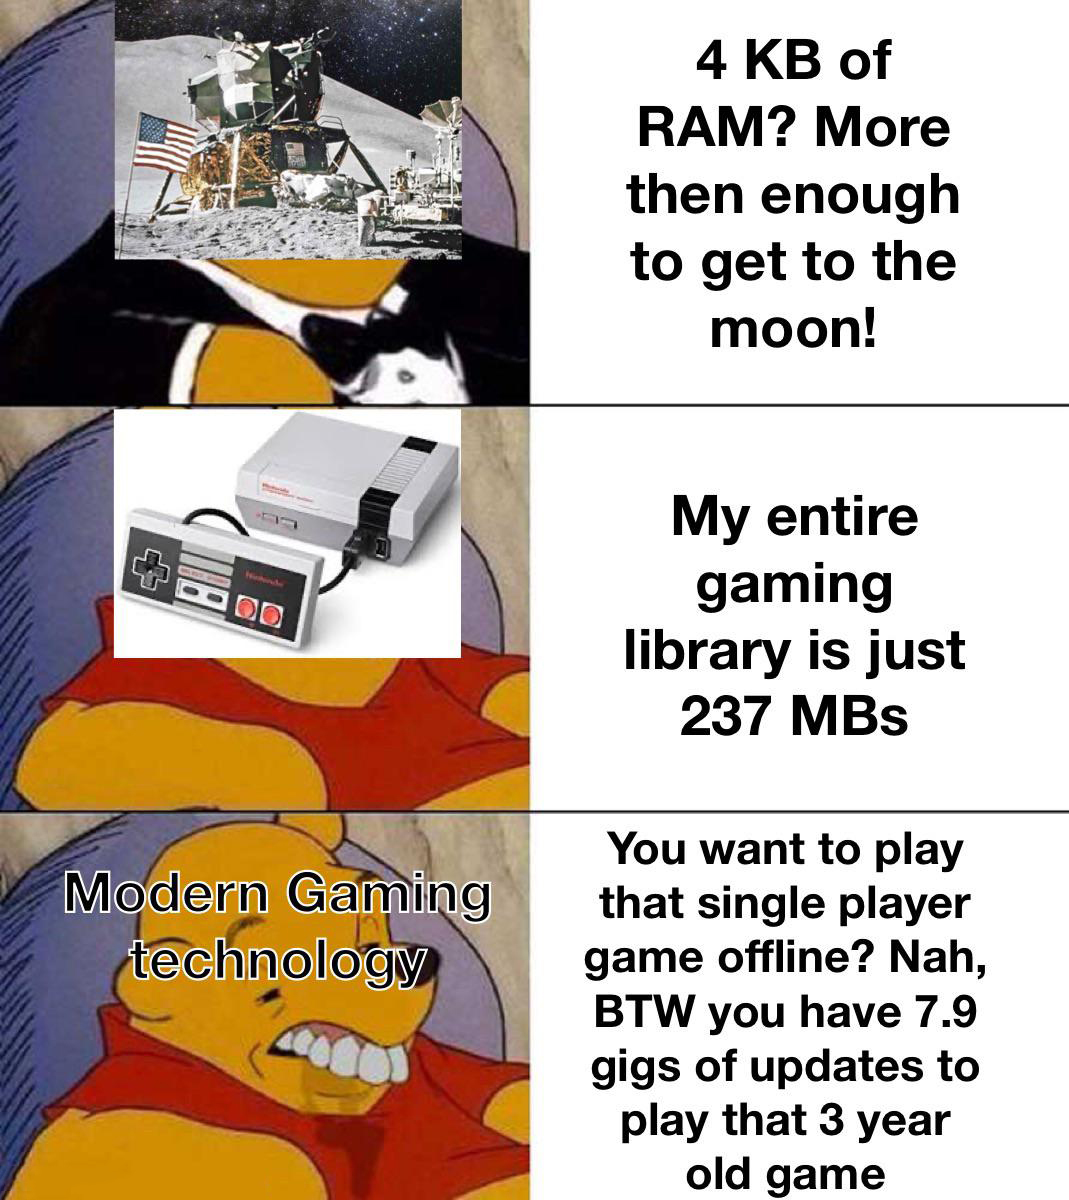 funny memes and pics - cartoon - Do Modern Gaming technology 4 Kb of Ram? More then enough to get to the moon! My entire gaming library is just 237 MBs You want to play that single player game offline? Nah, Btw you have 7.9 gigs of updates to play that 3 